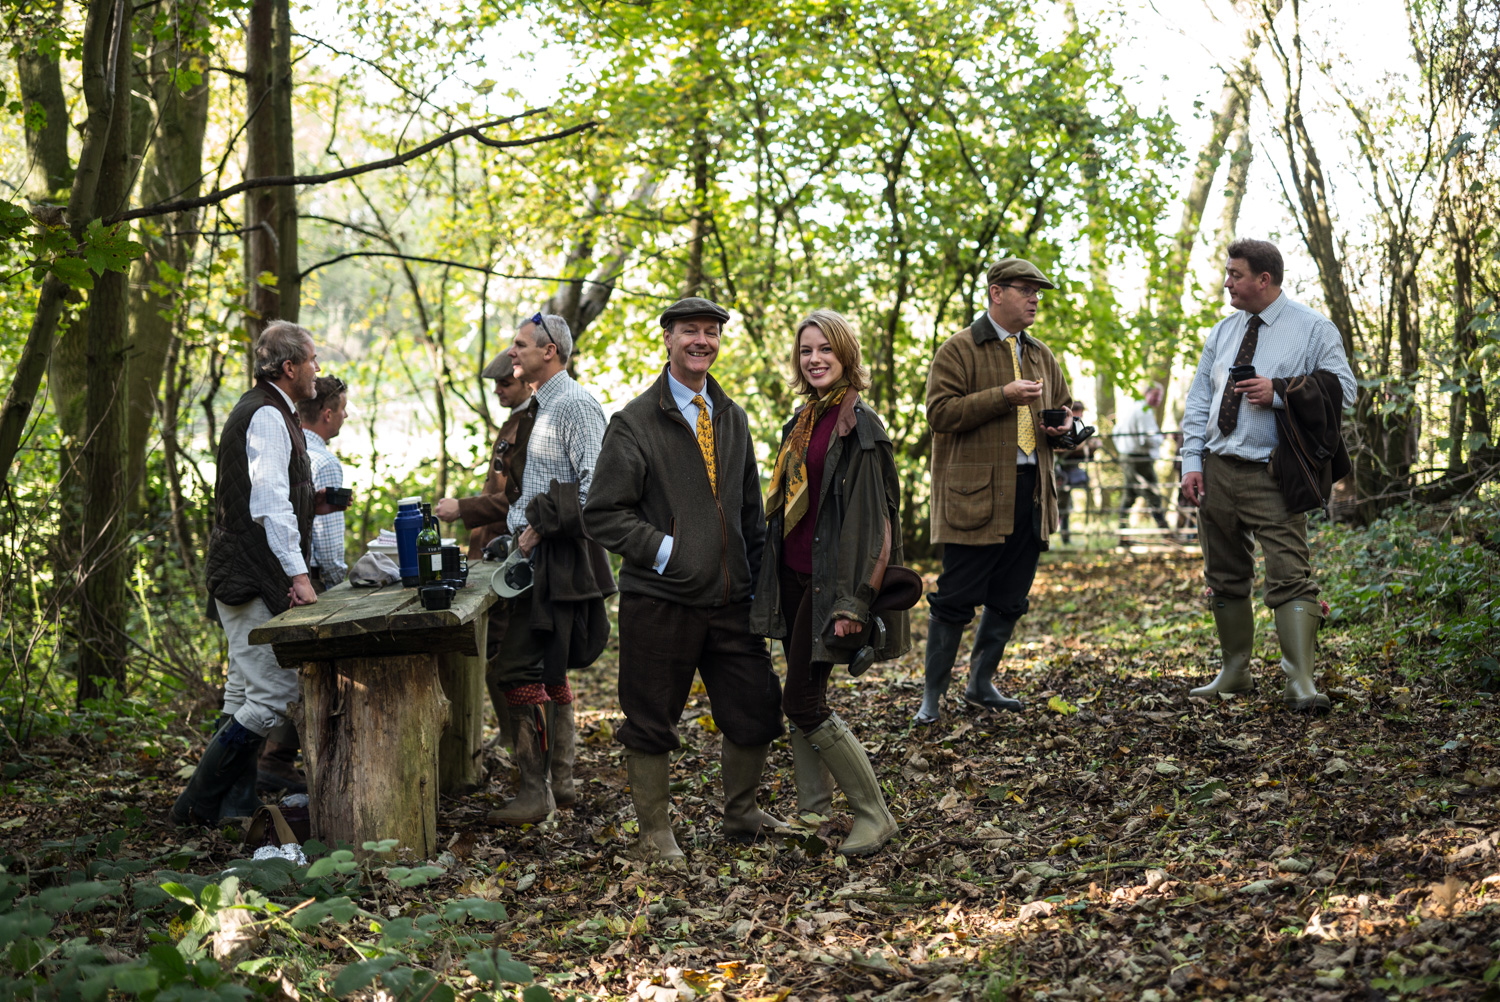 The Park. A Traditional Day of Shooting in England by Tim Wilkes. / The ...